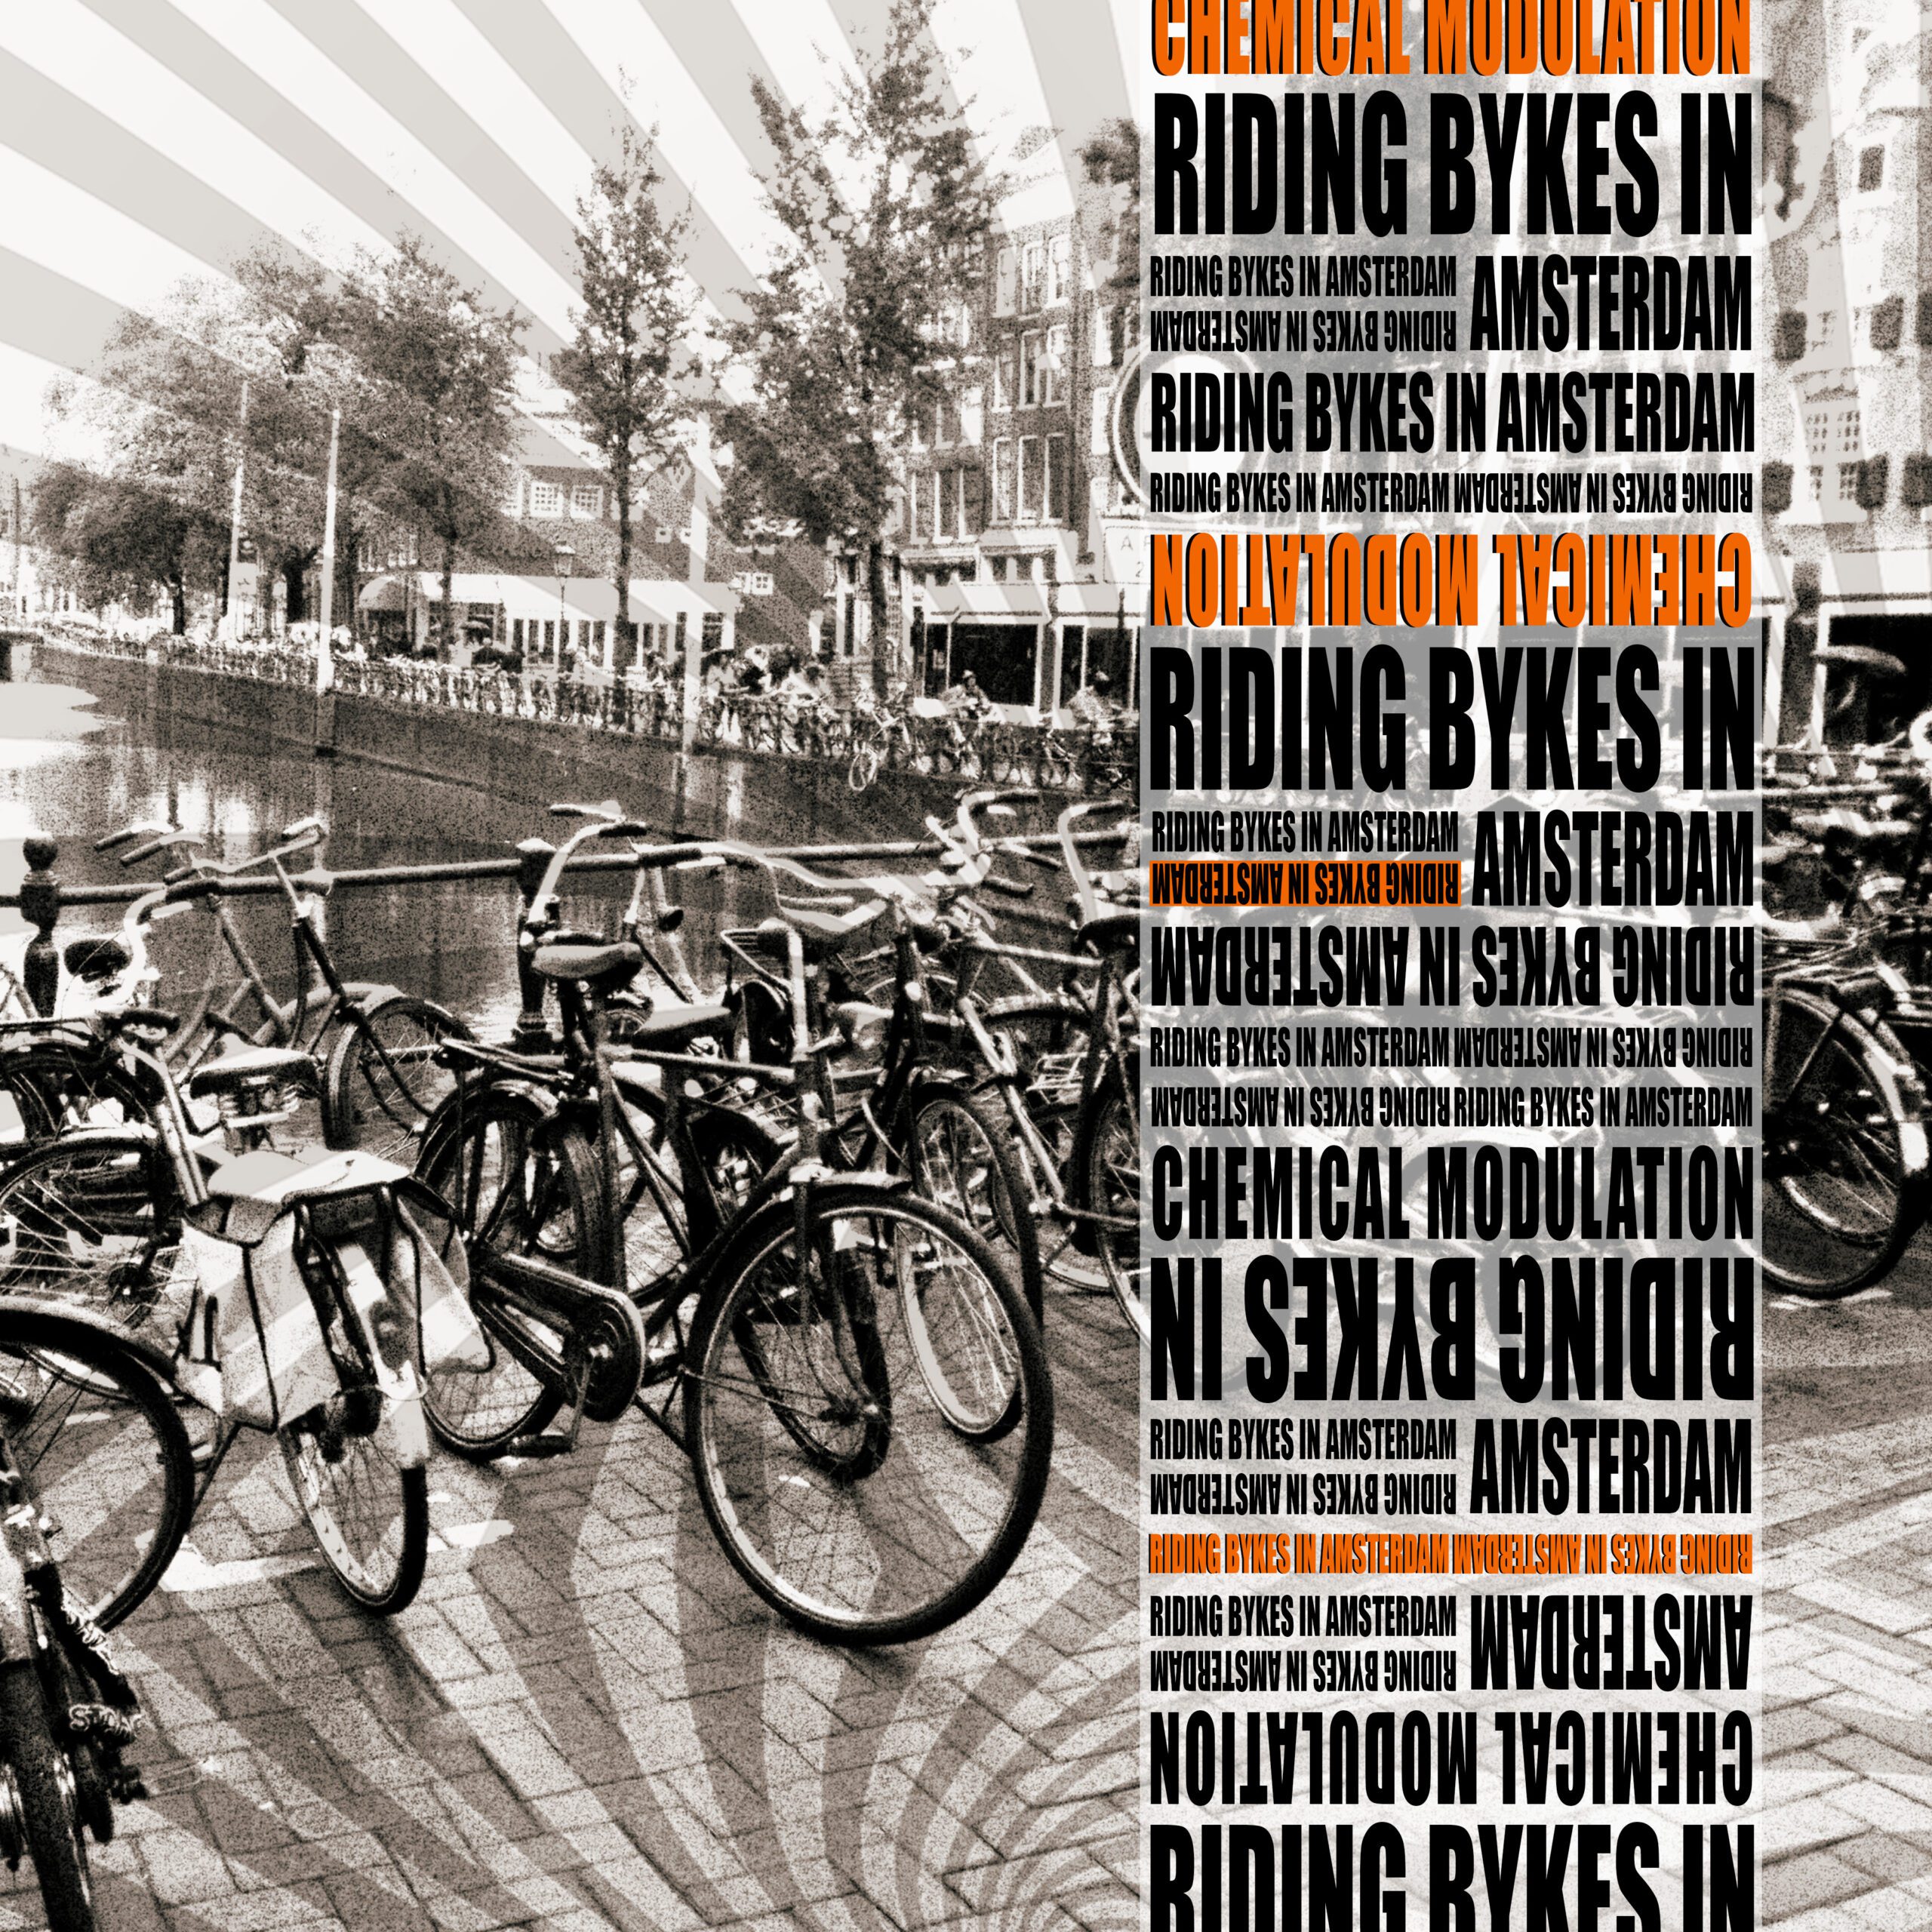 Riding Byke in Amsterdam (The Remix Collaboration) is out on Bandcamp